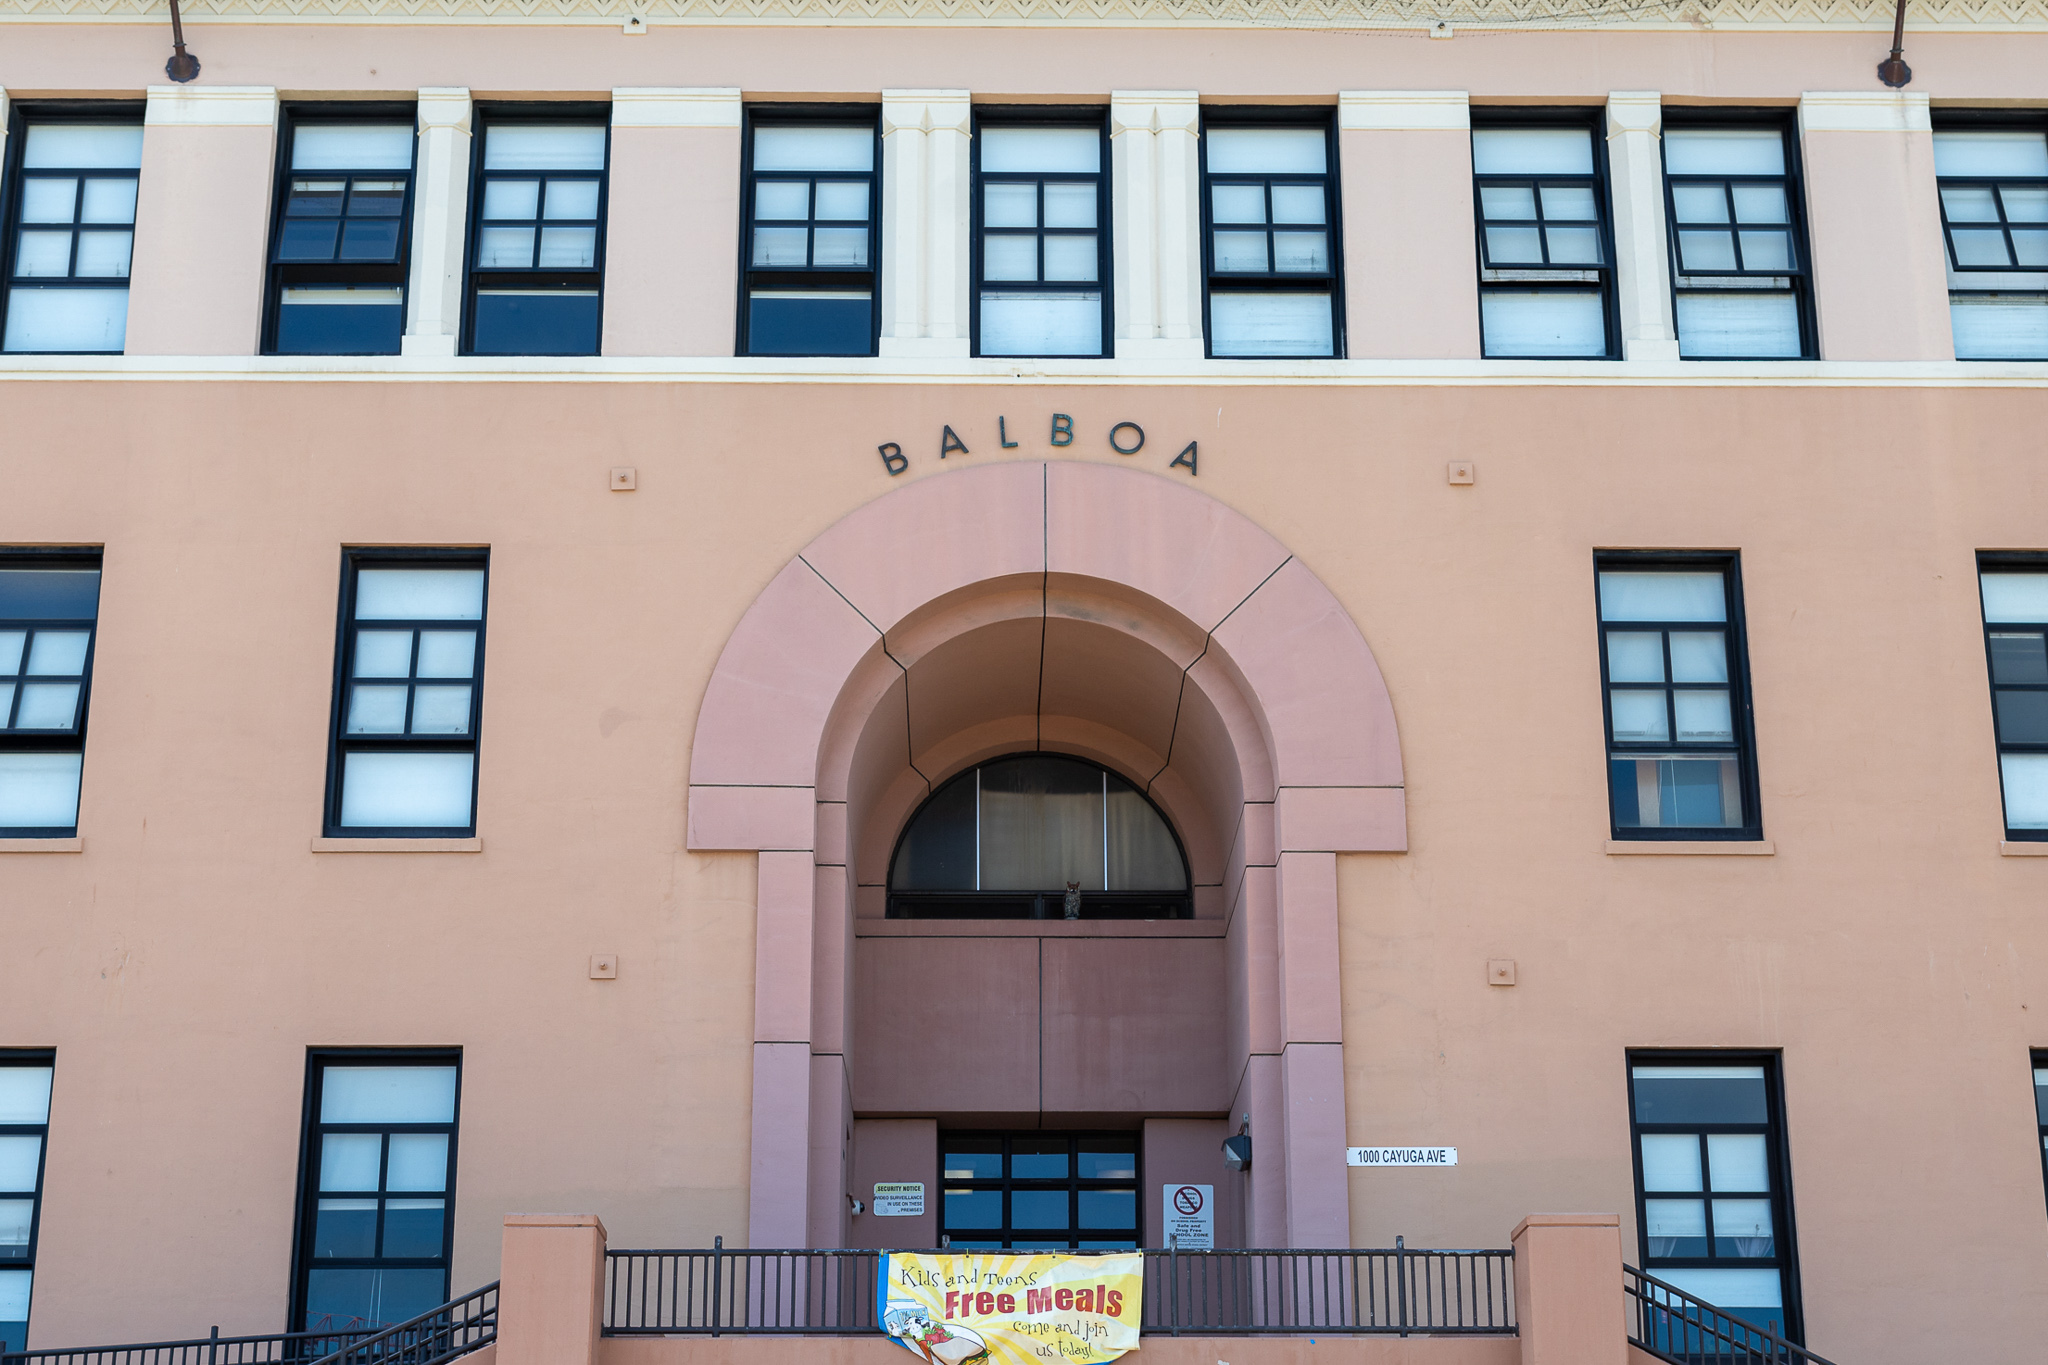 5 Years After Balboa High School Went Into Lockdown, Another Student Brought a Gun Undetected